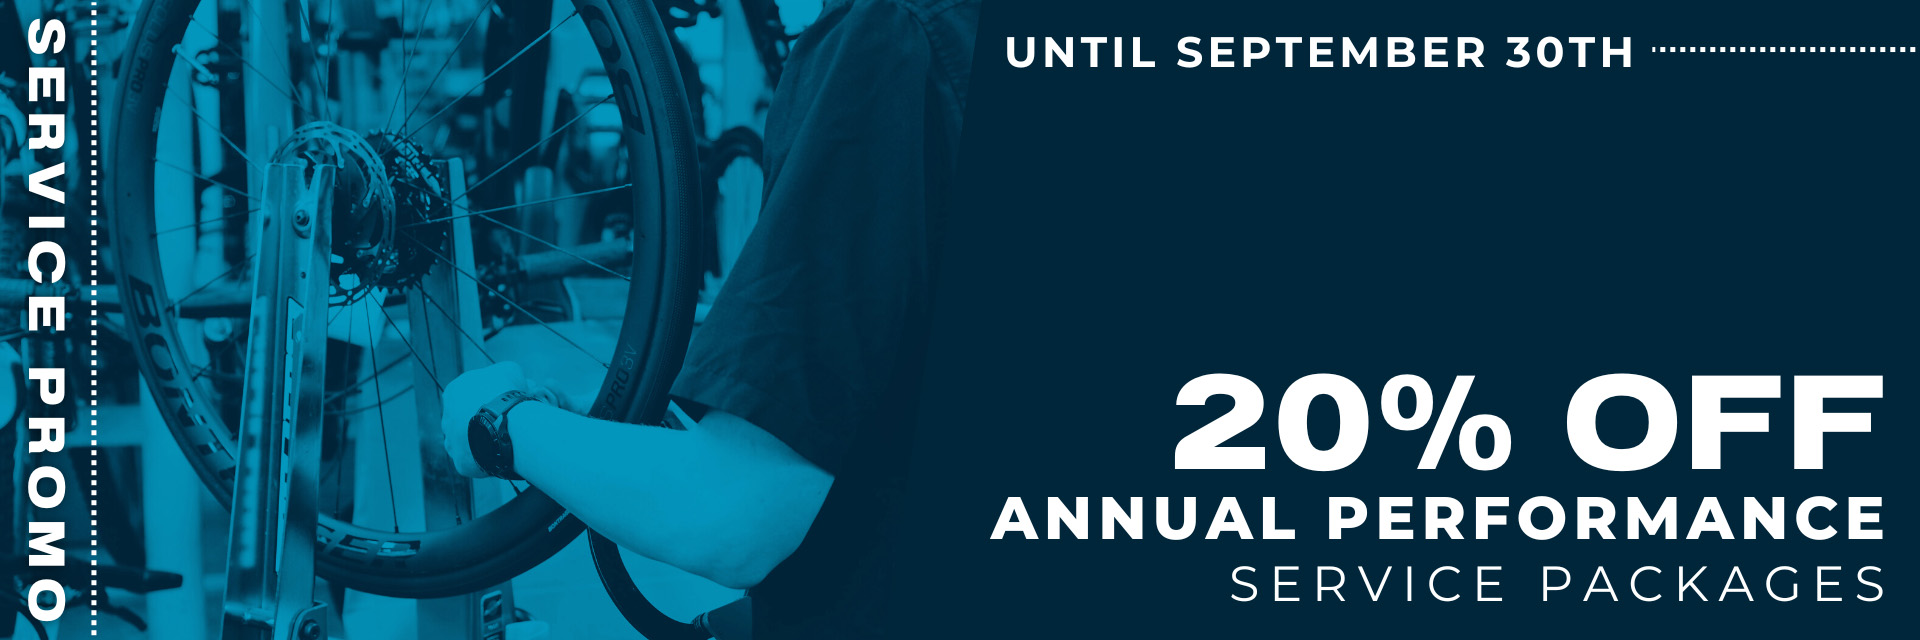 20% Off Annual Performance Service Packages Until Sept. 30